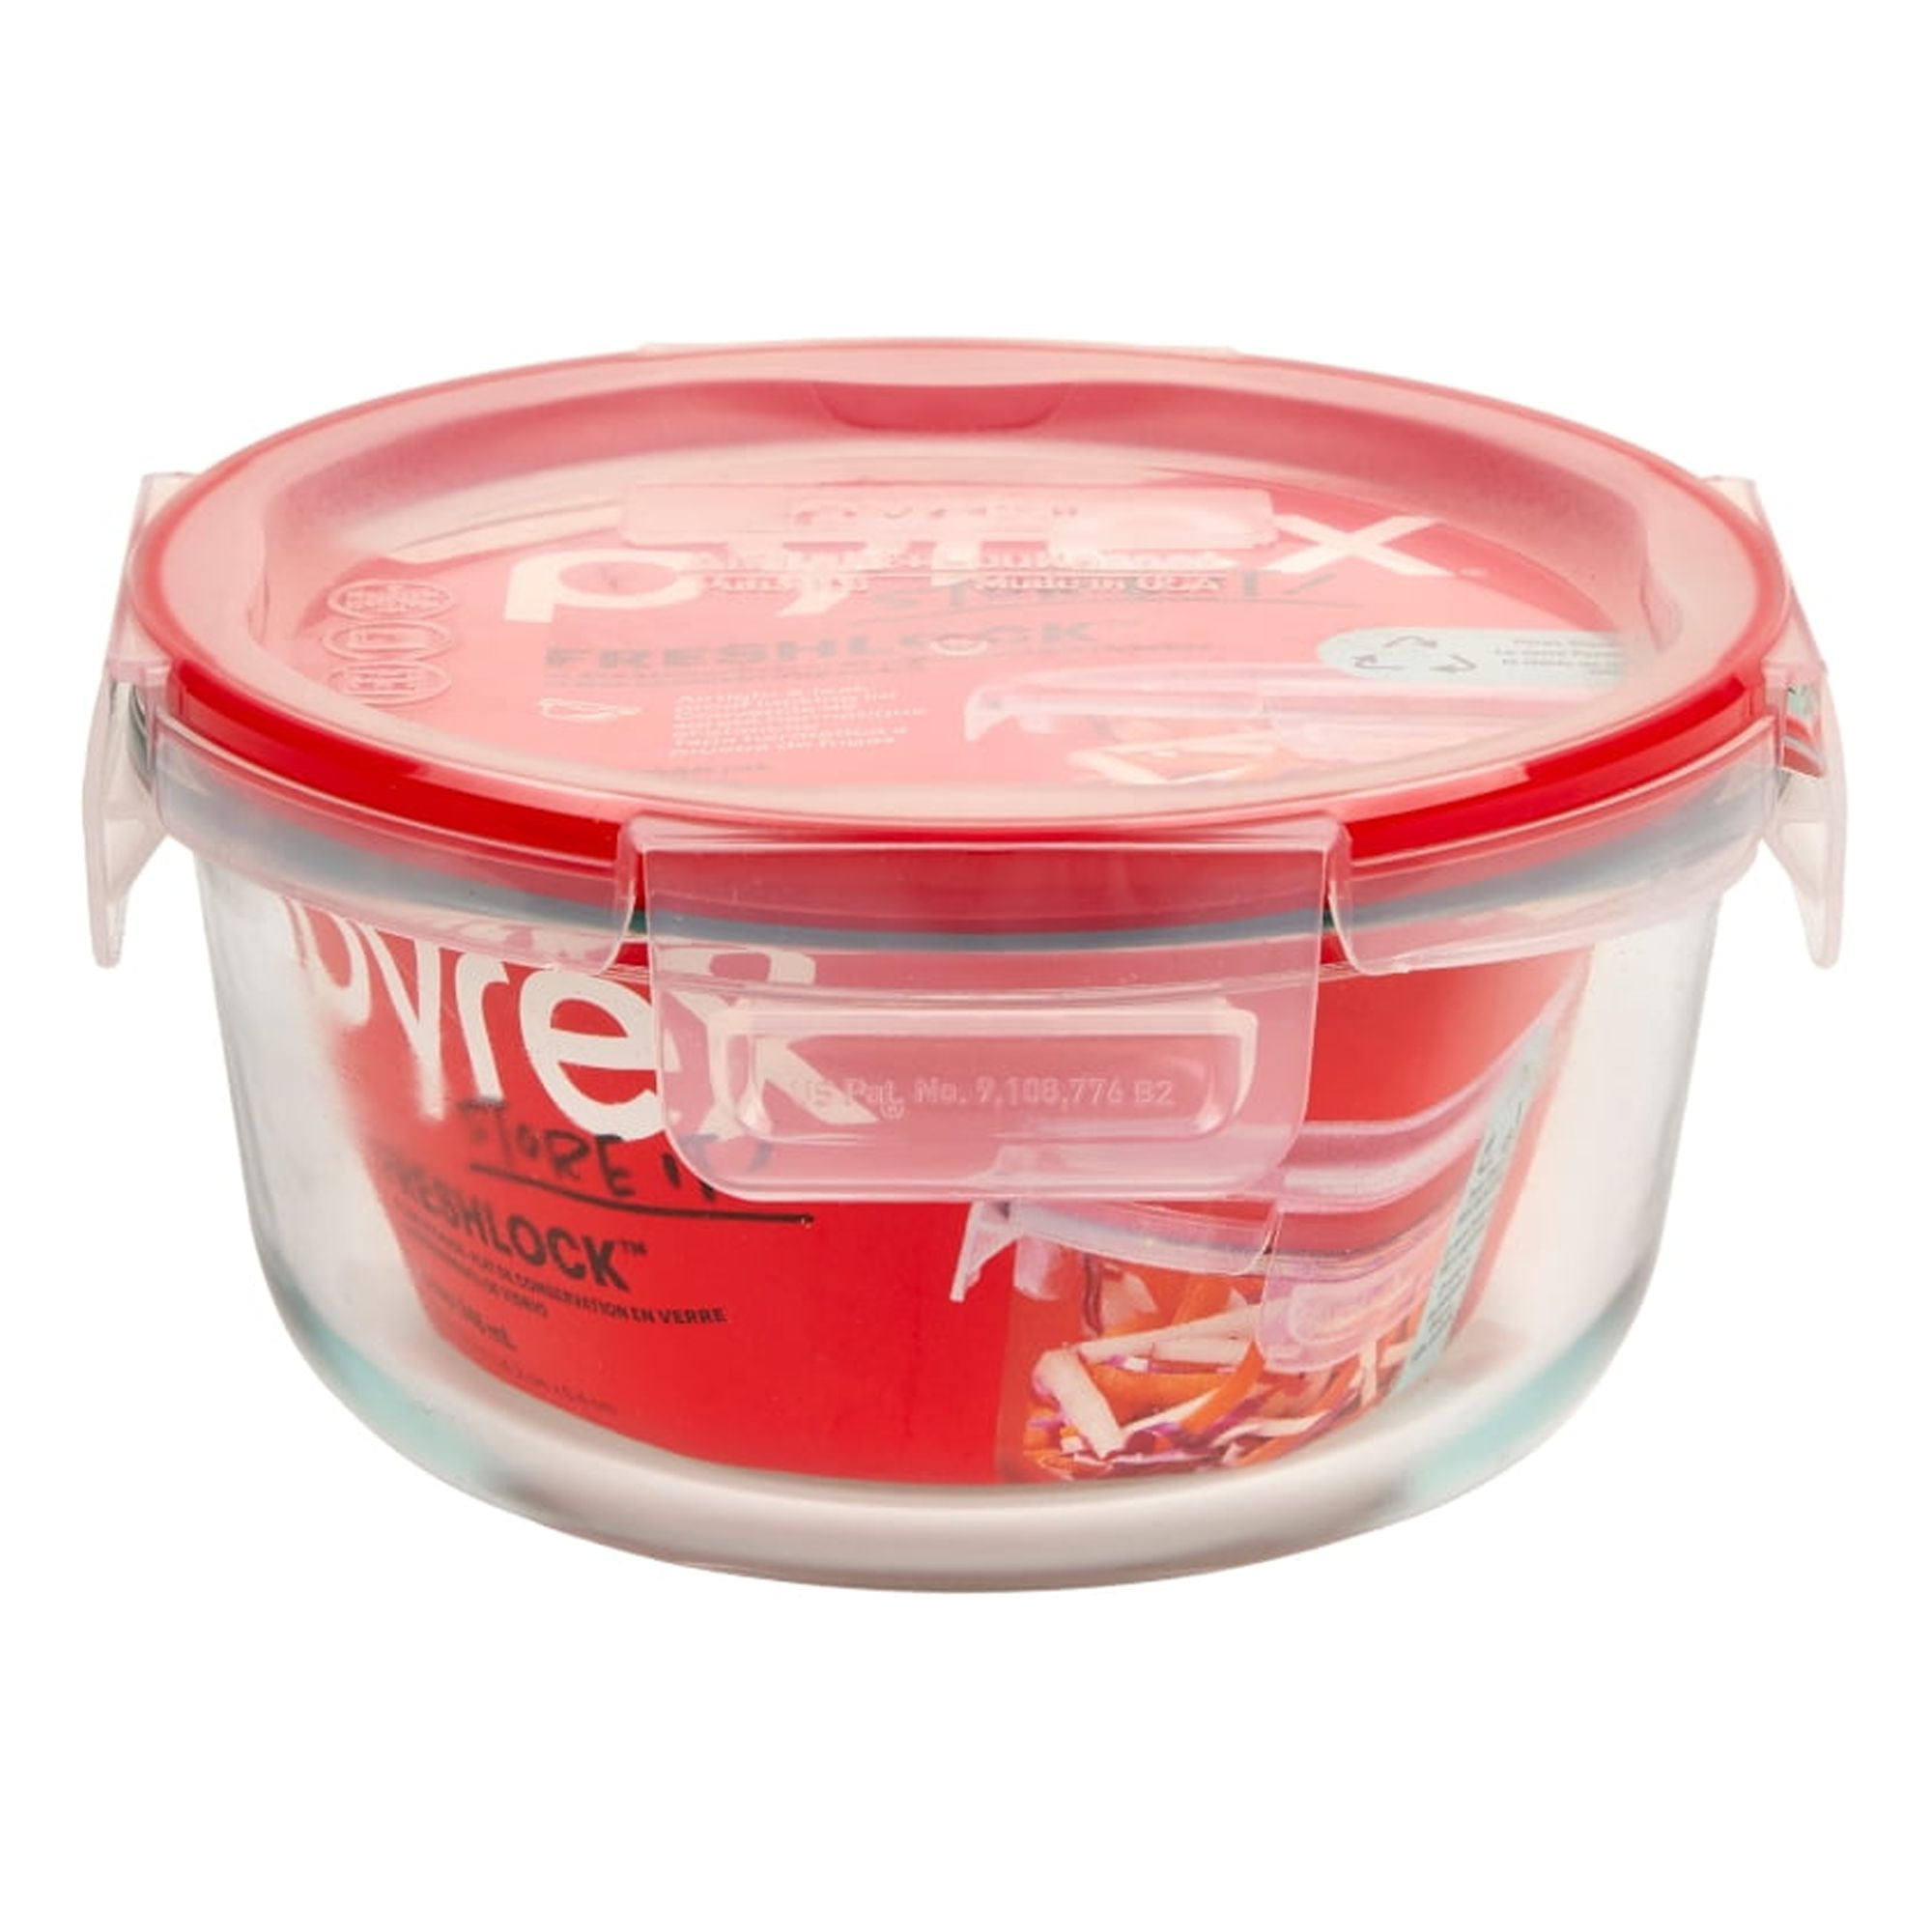 Pyrex Freshlock 10-Pieces 4-Cup Glass Food Storage Containers Set, Airtight  & Leakproof Locking Lids, Freezer Dishwasher Microwave Safe